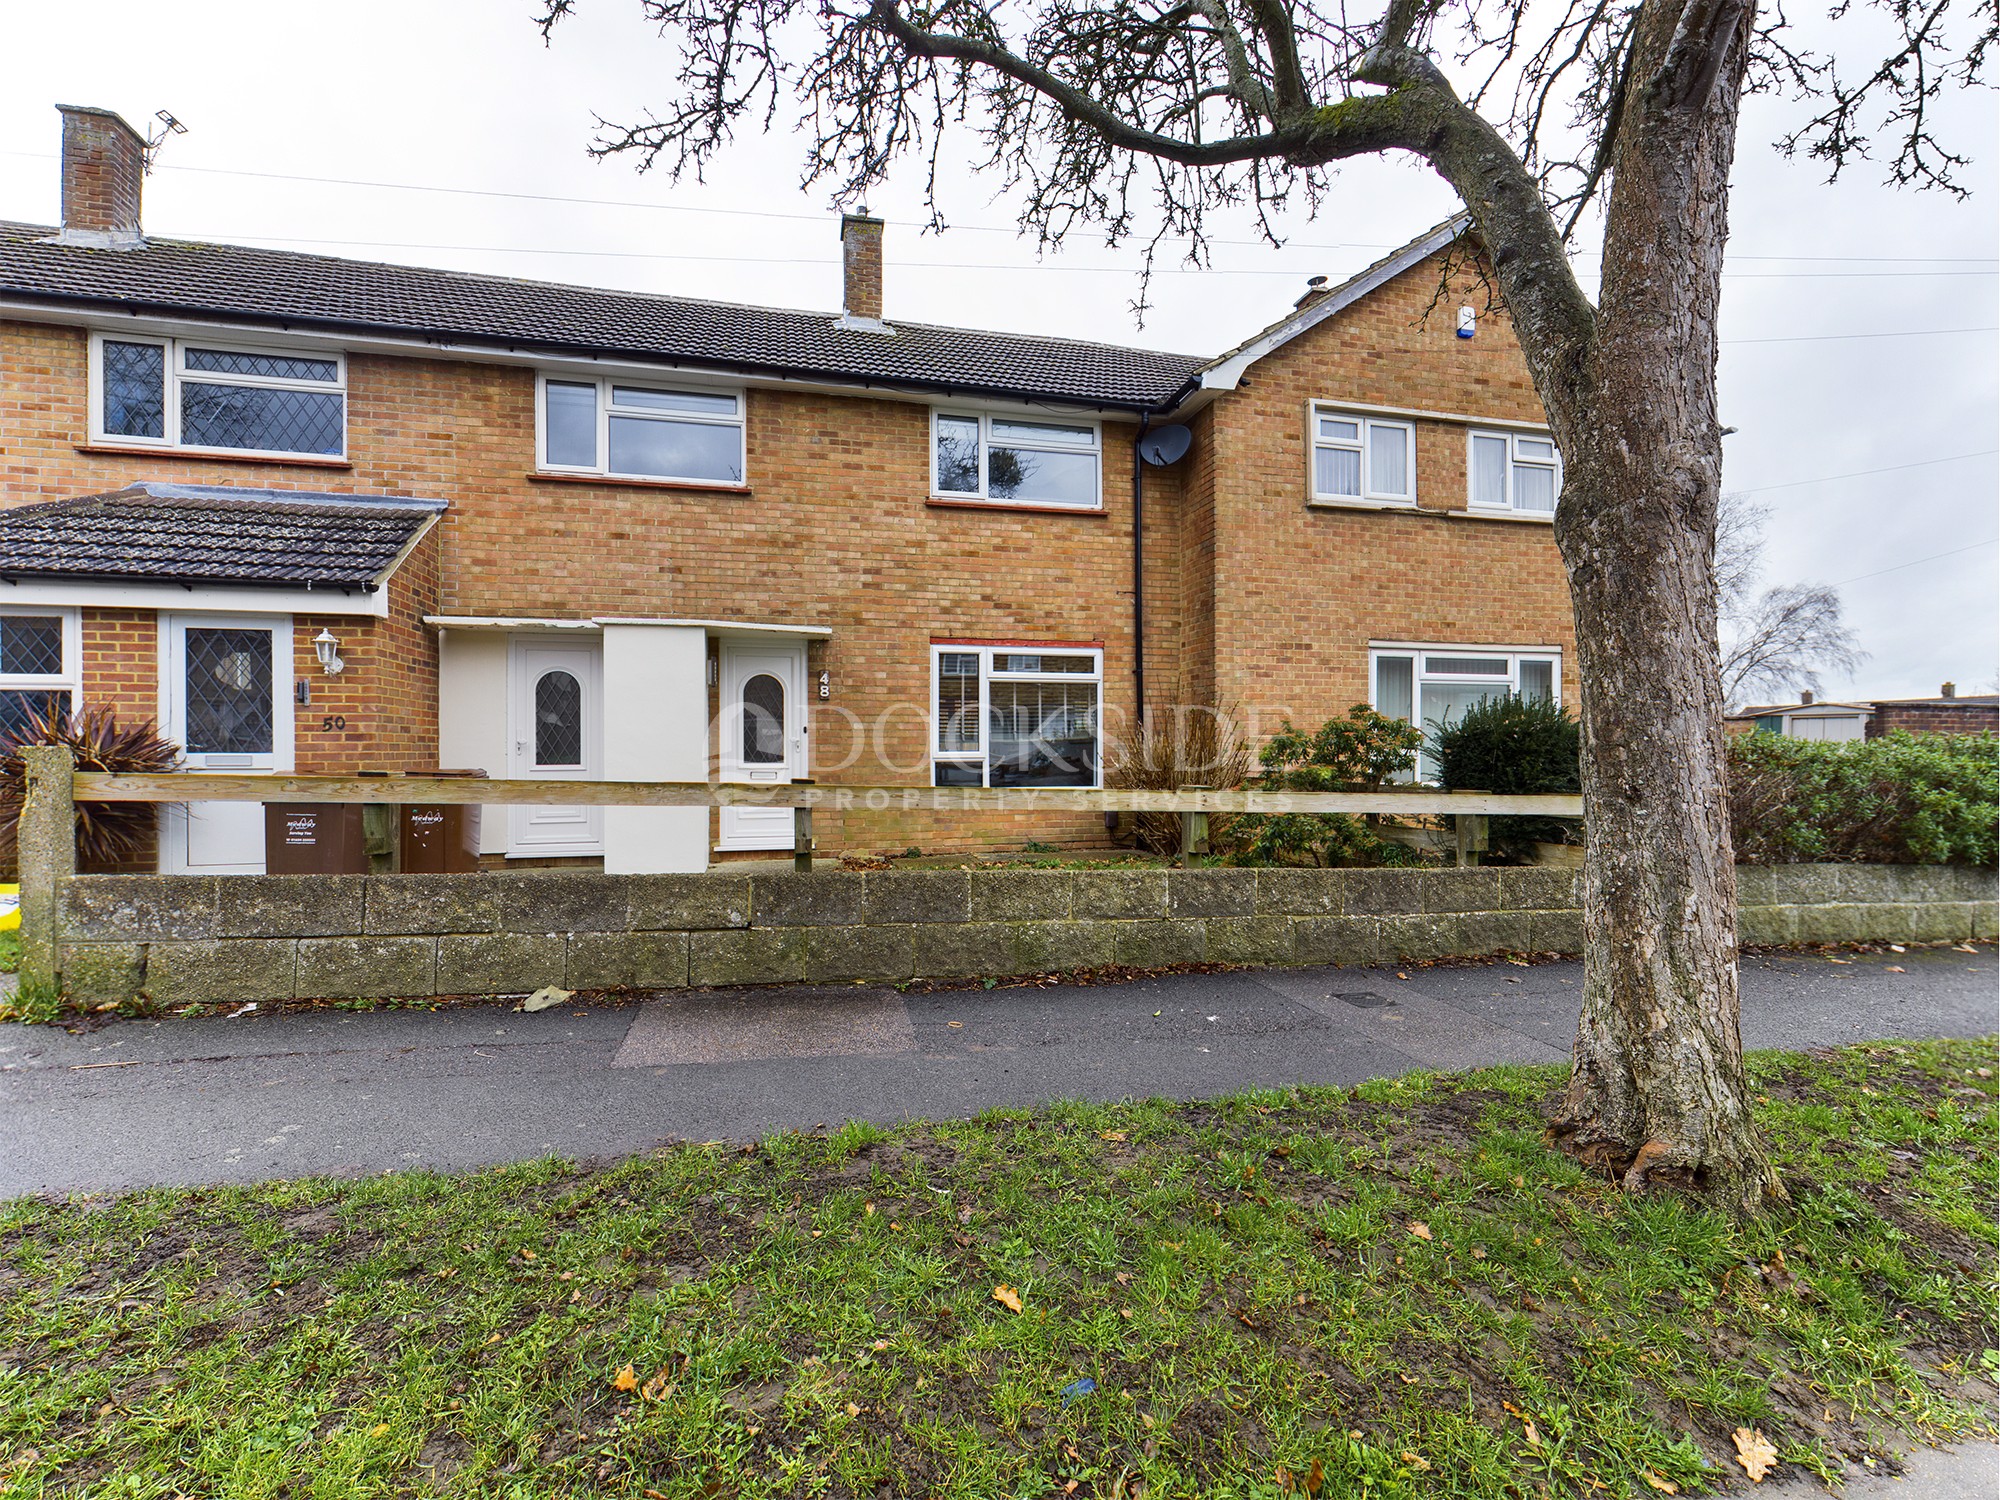 3 bed house for sale in Warren Wood Road, Rochester - Property Image 1